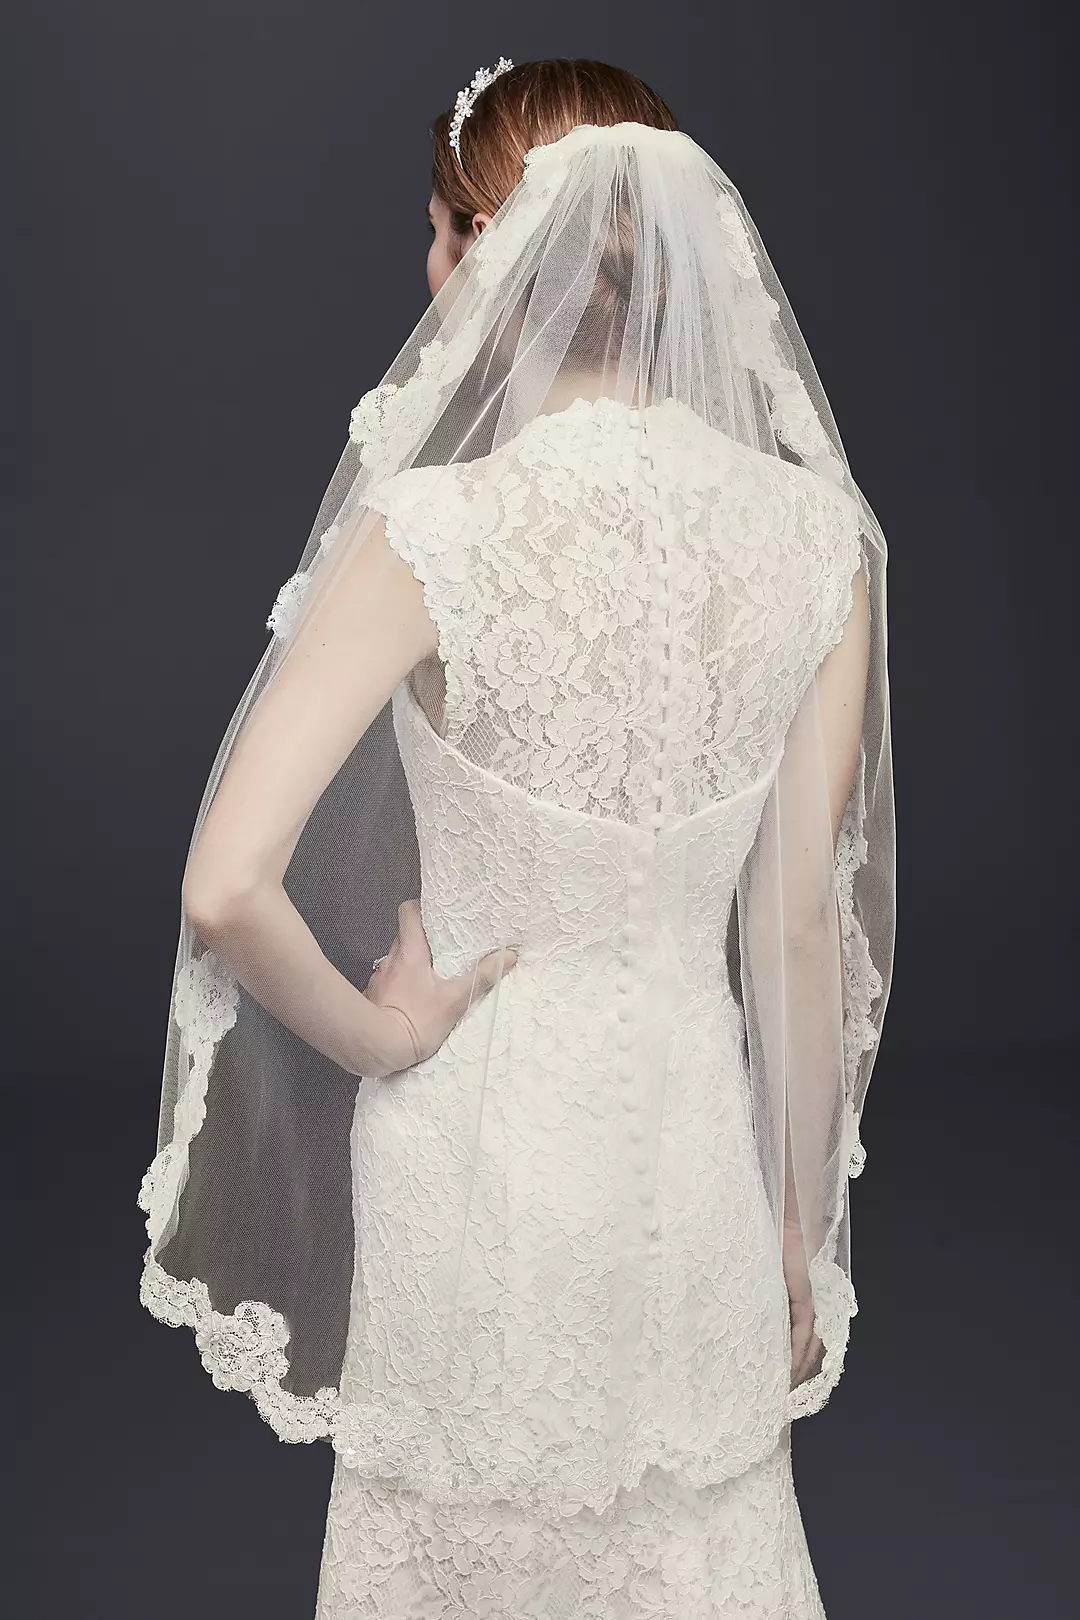 One Tier Veil with Pearl Embellished Alencon Lace Image